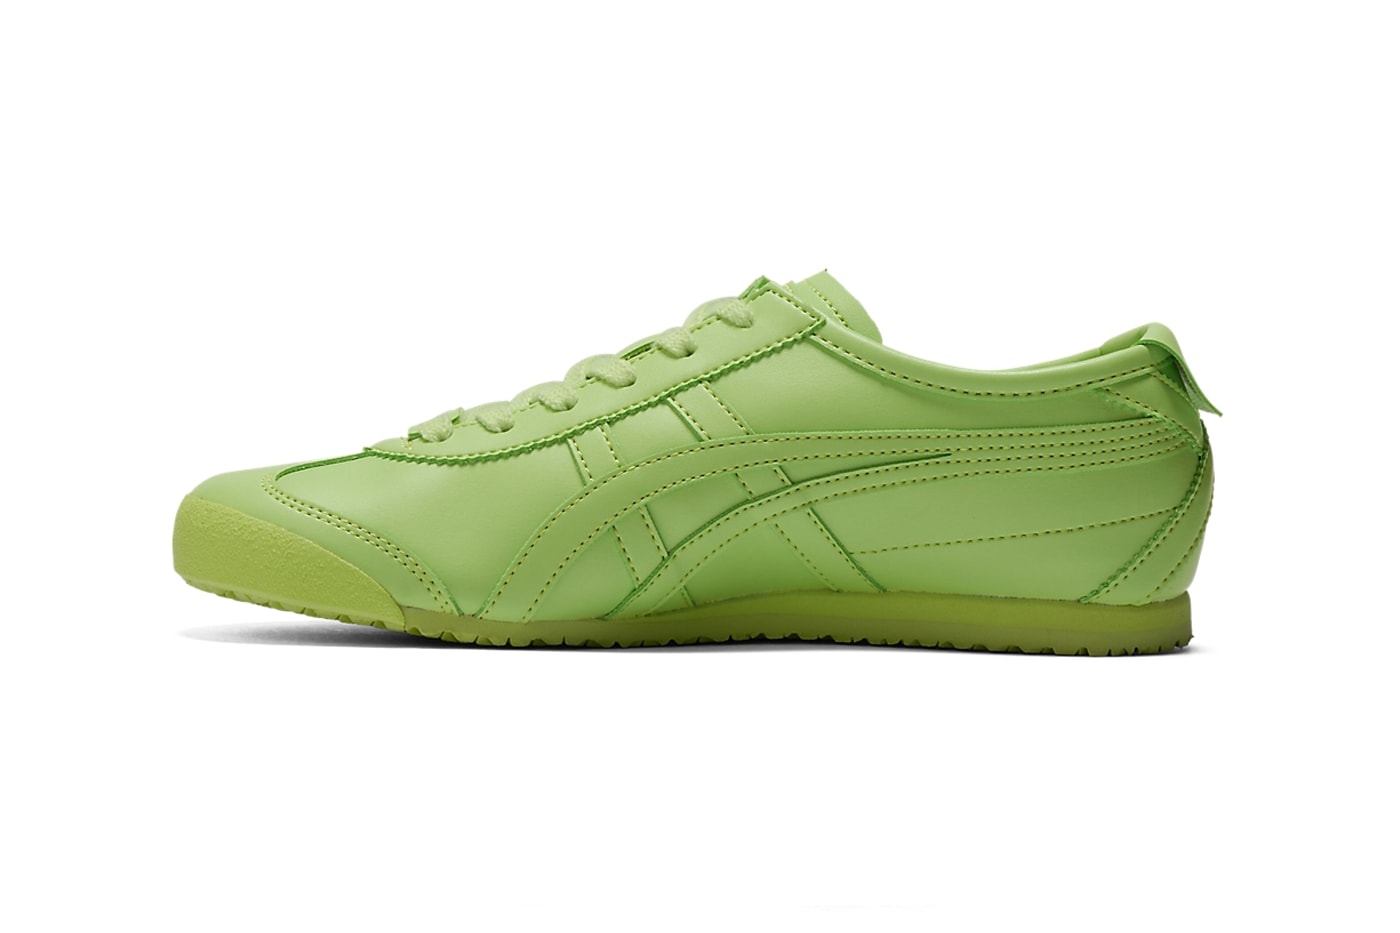 Onitsuka Tiger mexico 66 cactful mexico cactus yellow blue white green purple release info date price